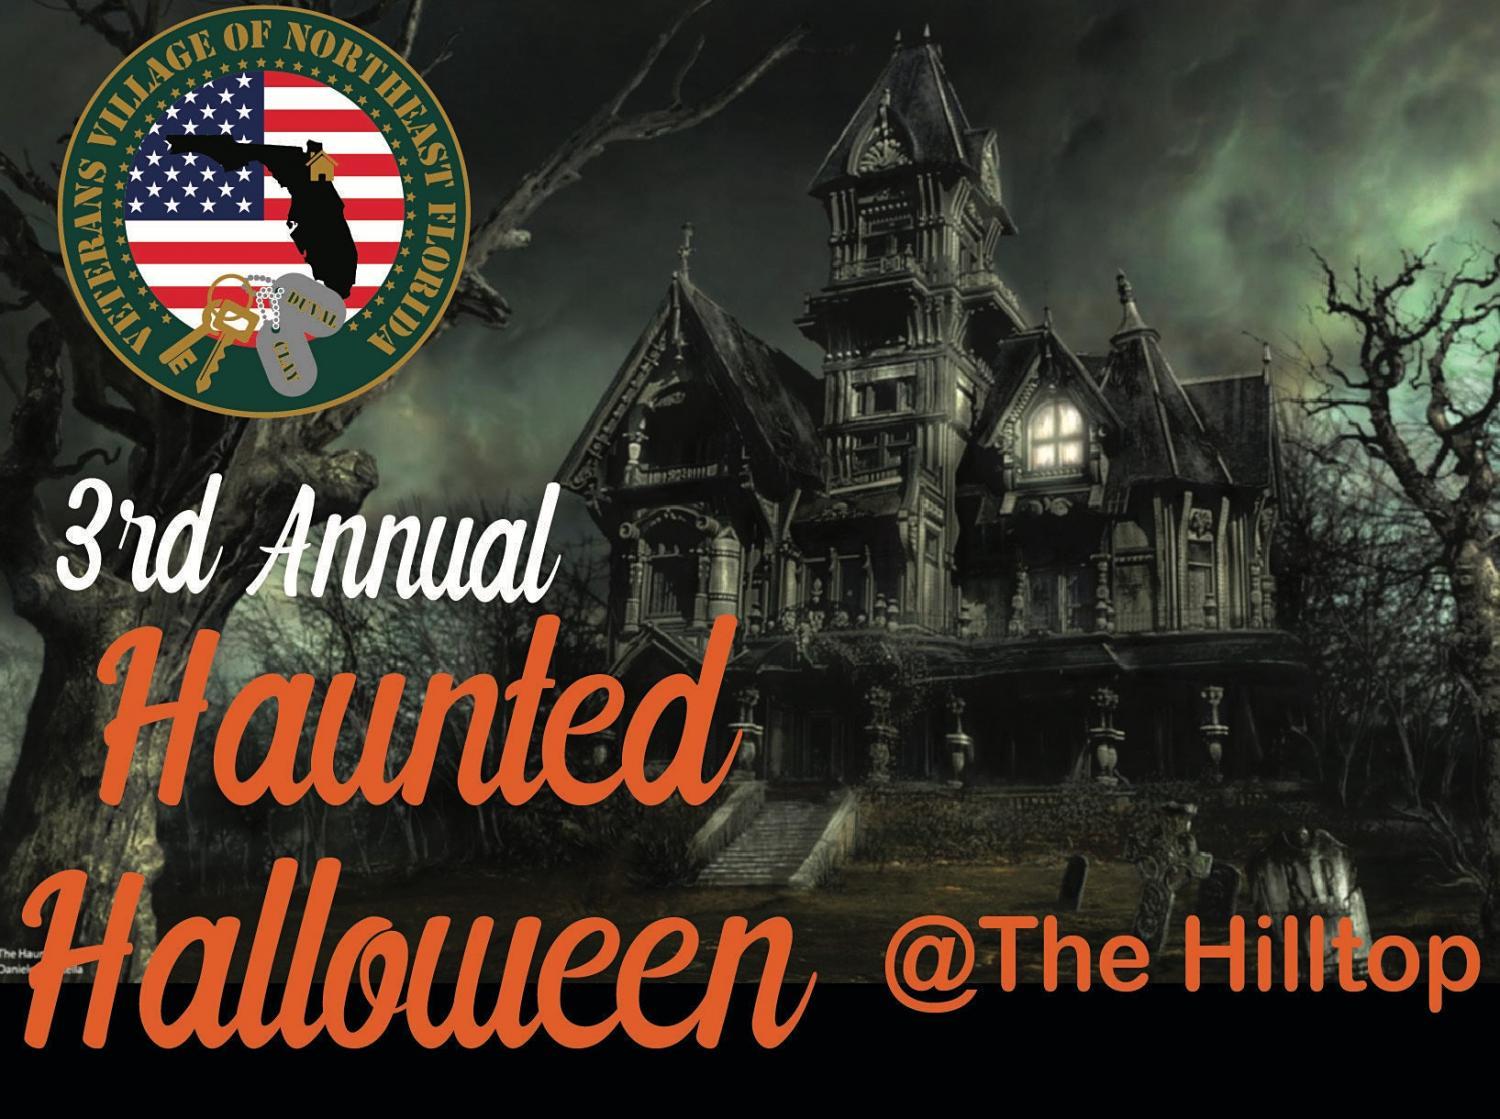 3rd Annual Haunted Halloween at The Hilltop
Fri Oct 28, 7:00 PM - Fri Oct 28, 11:00 PM
in 9 days